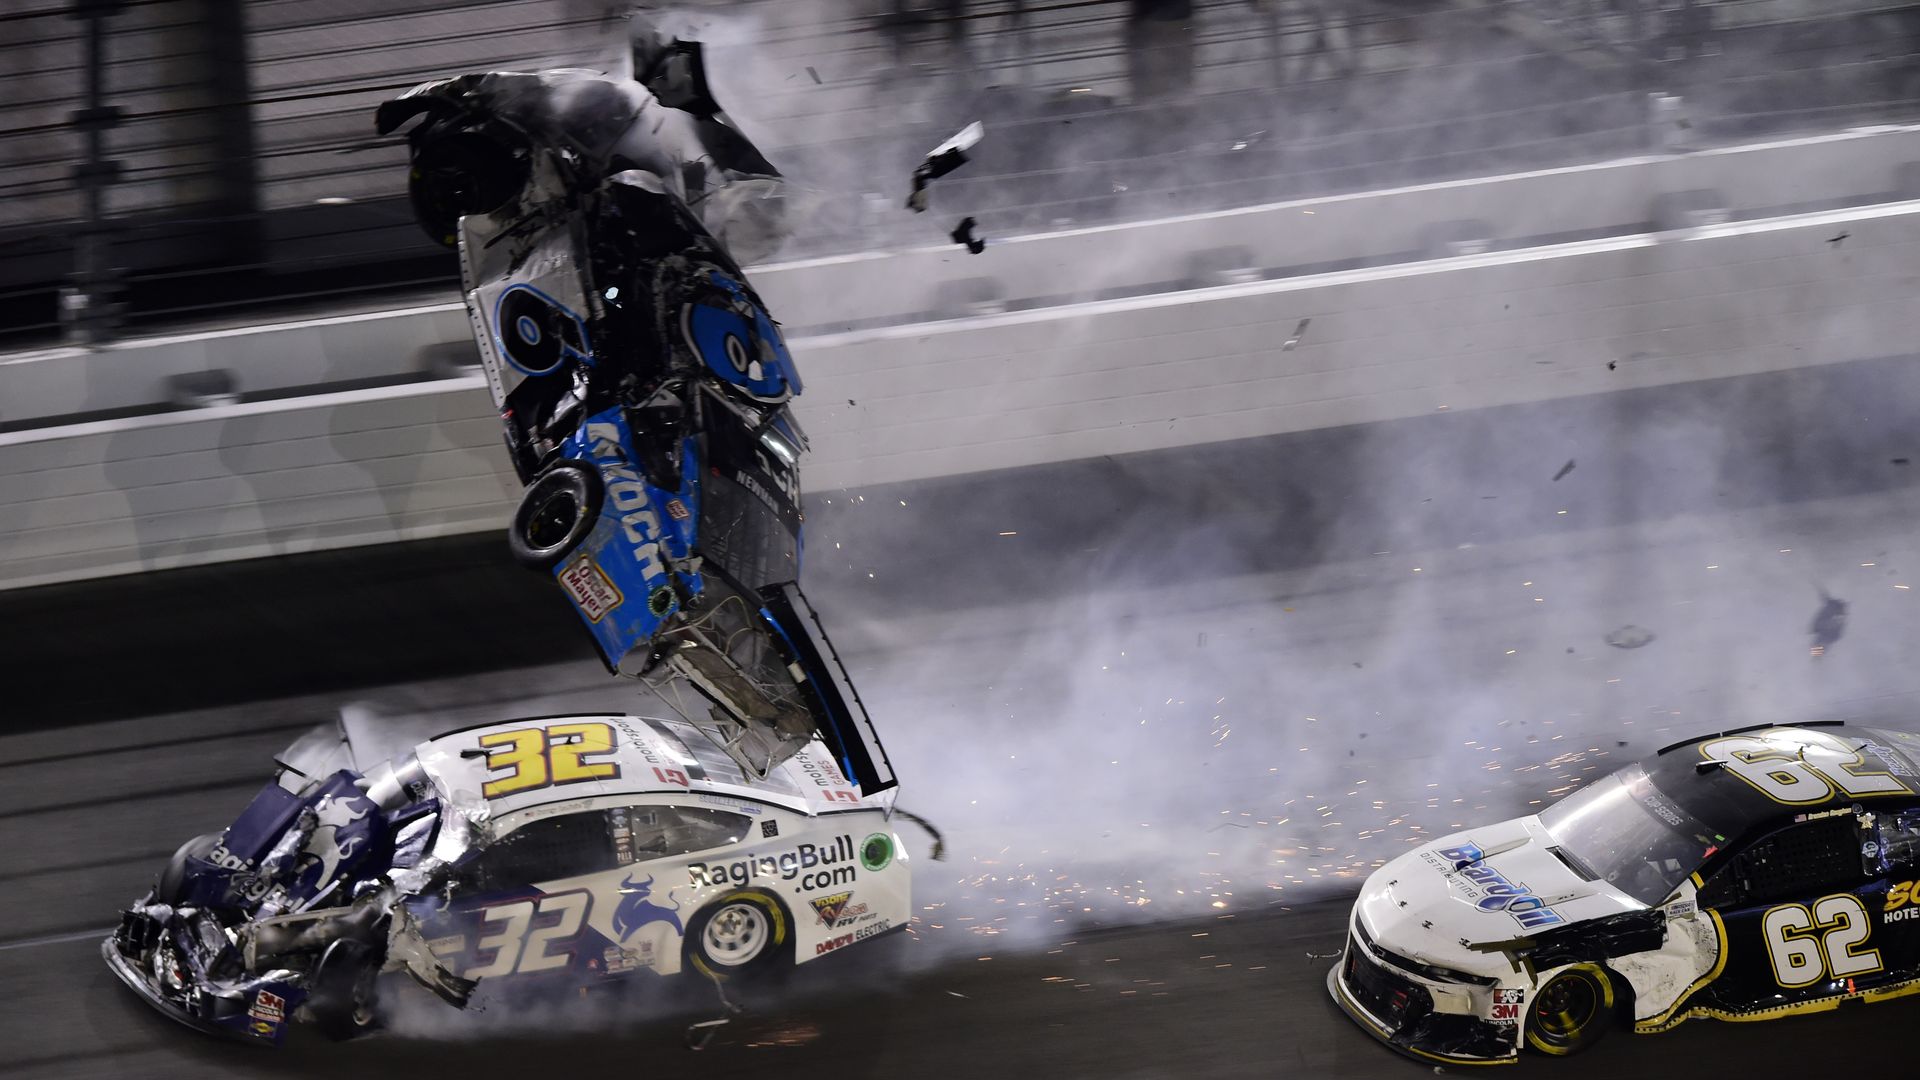 Ryan Newman, driver of the #6 Koch Industries Ford, crashes during the NASCAR Cup Series 62nd Annual Daytona 500 at Daytona International Speedway on February 17, 2020 in Daytona Beach, Florida.